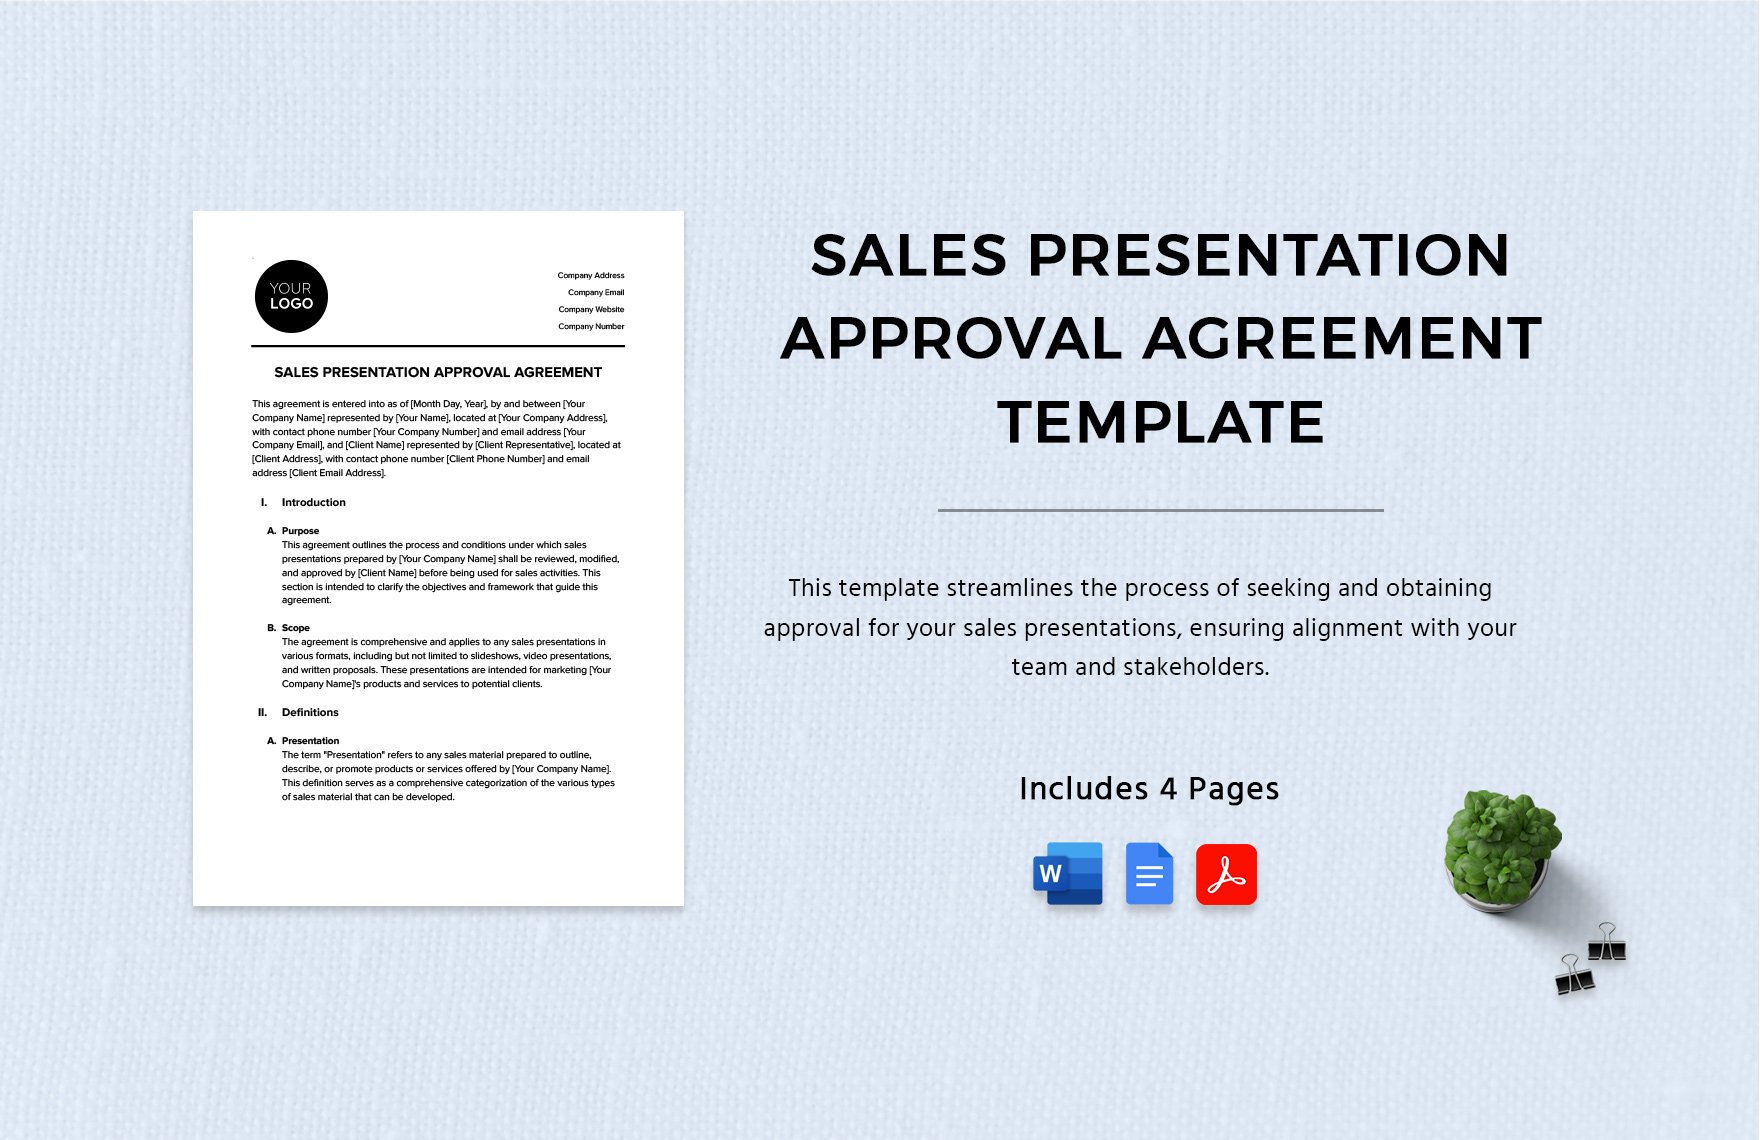 Sales Presentation Approval Agreement Template in Word, Google Docs, PDF